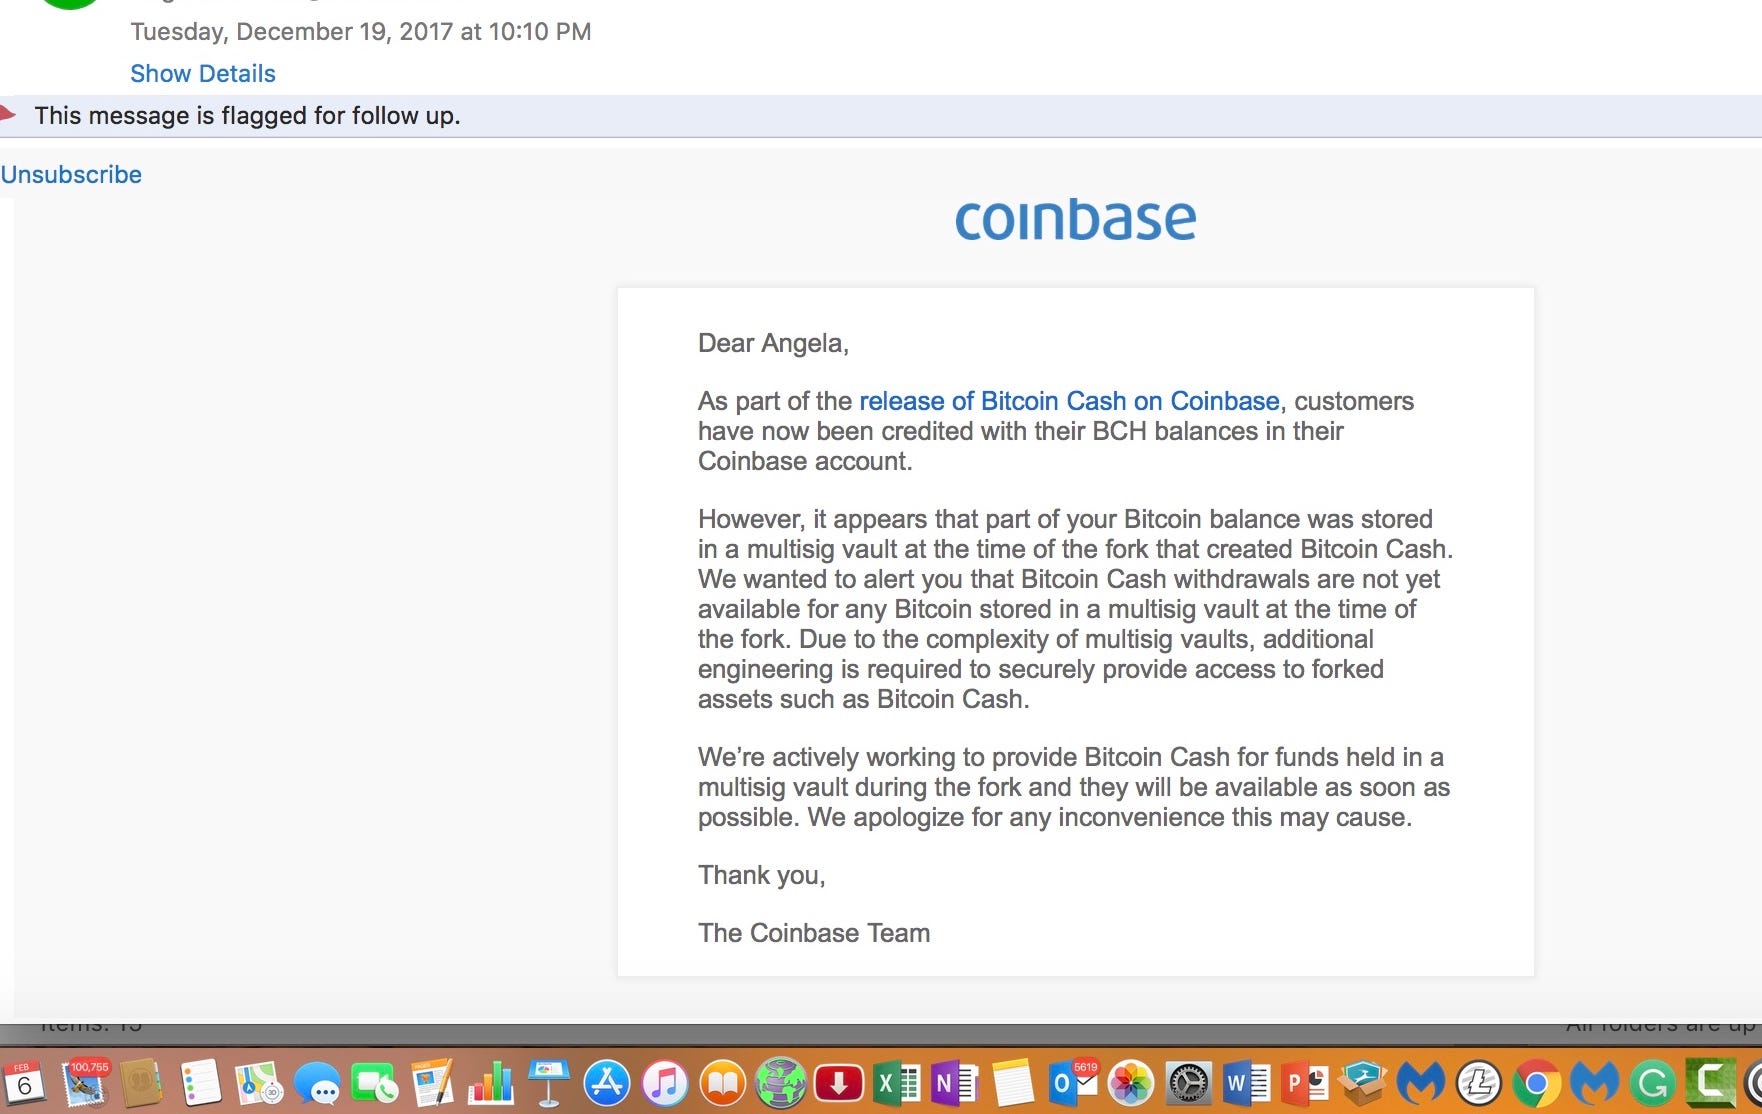 Coinbase U!   nfair Practice Of Providing Fork Assets To Some Customers - 